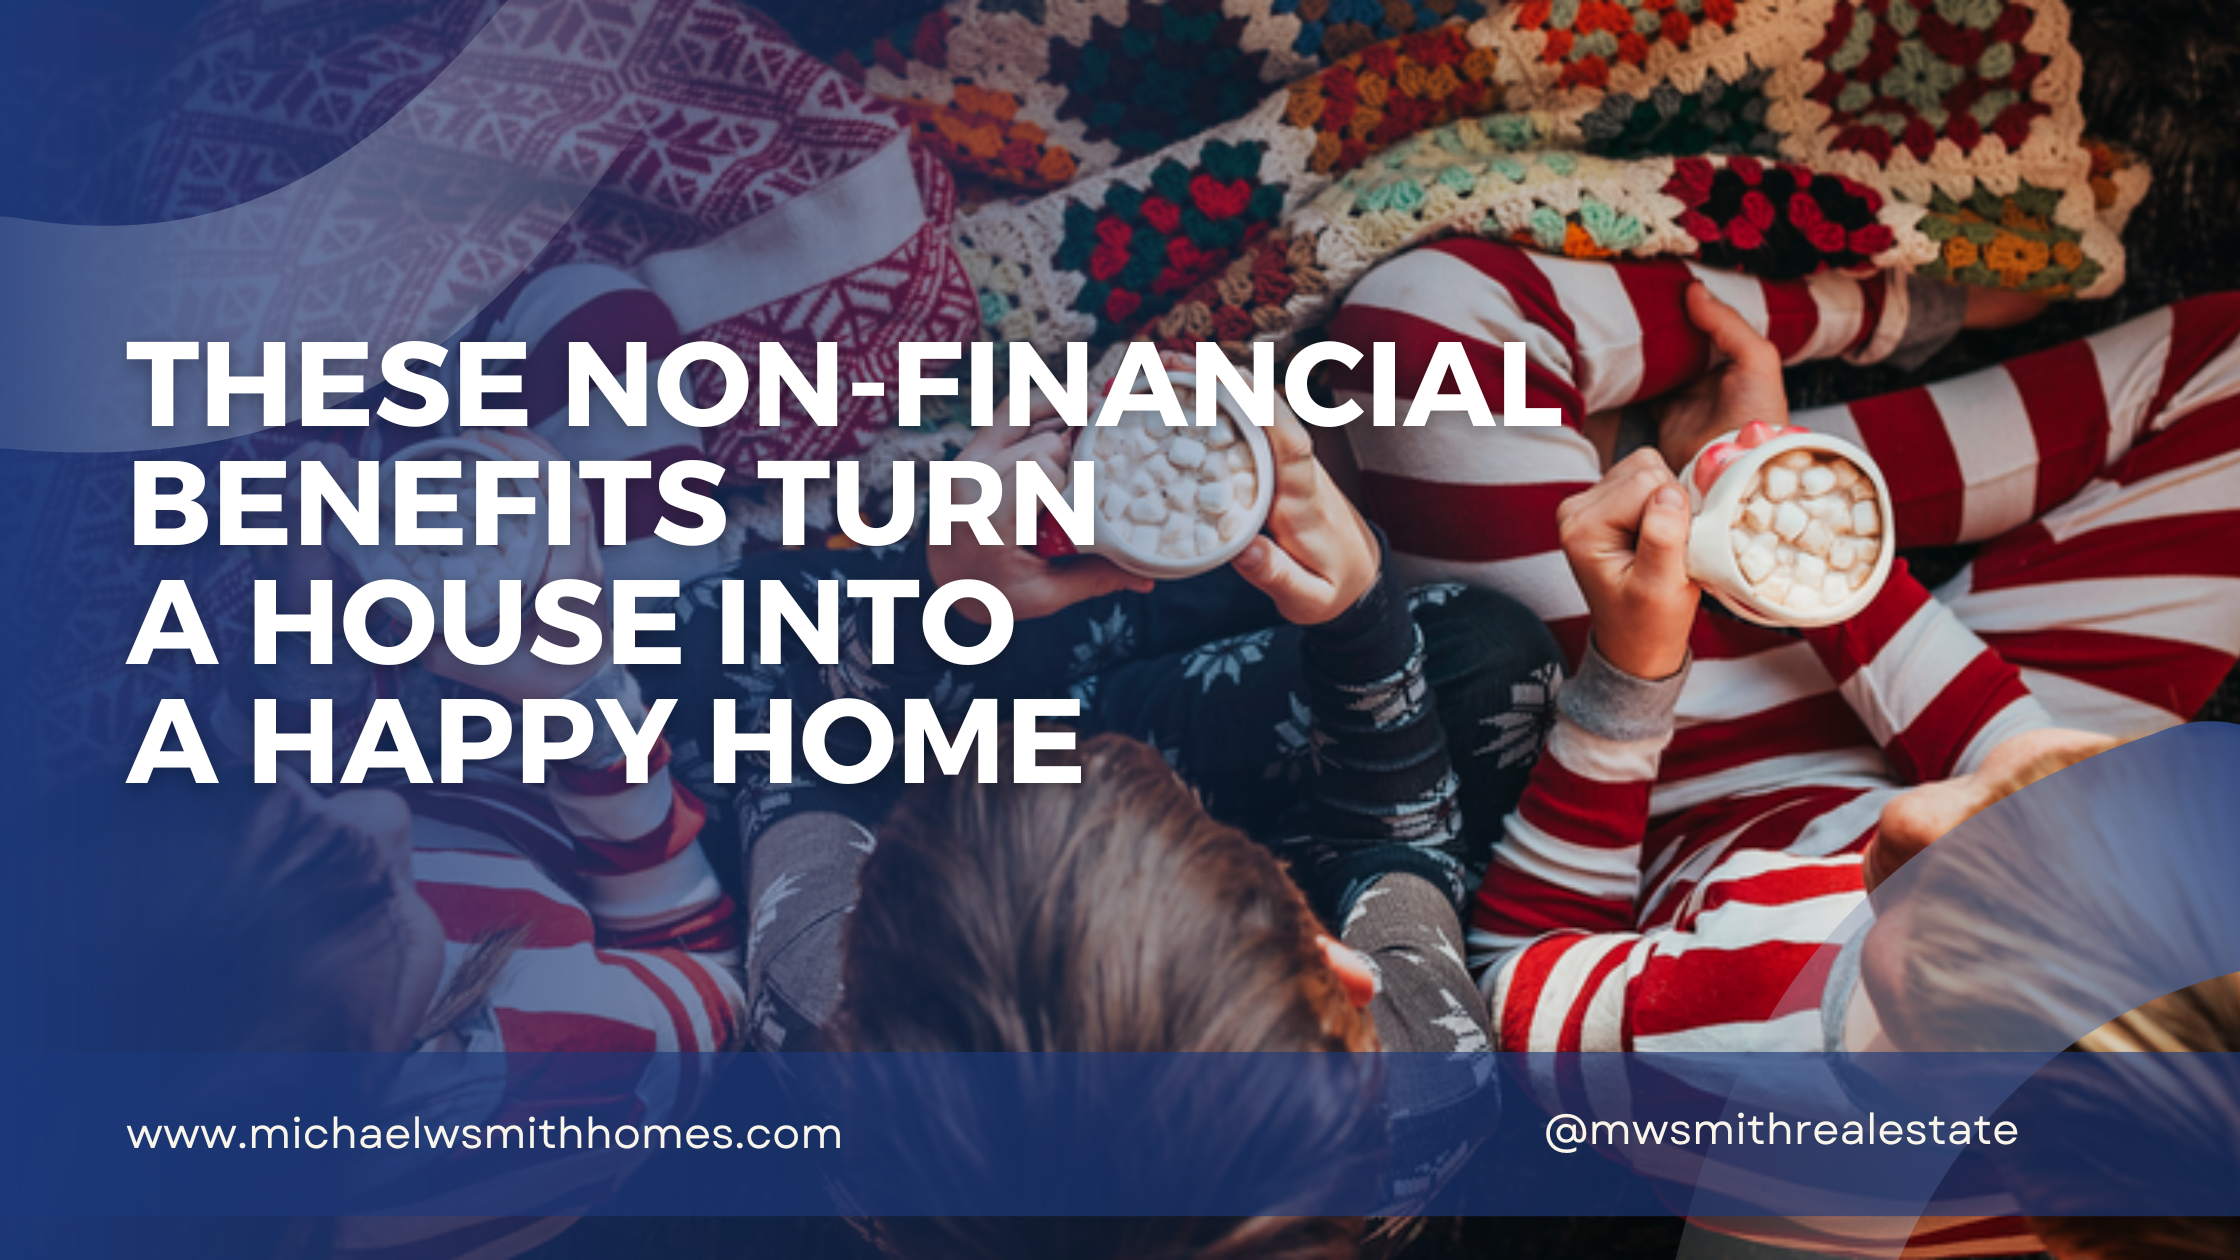 These Non-Financial Benefits Turn a House into a Happy Home